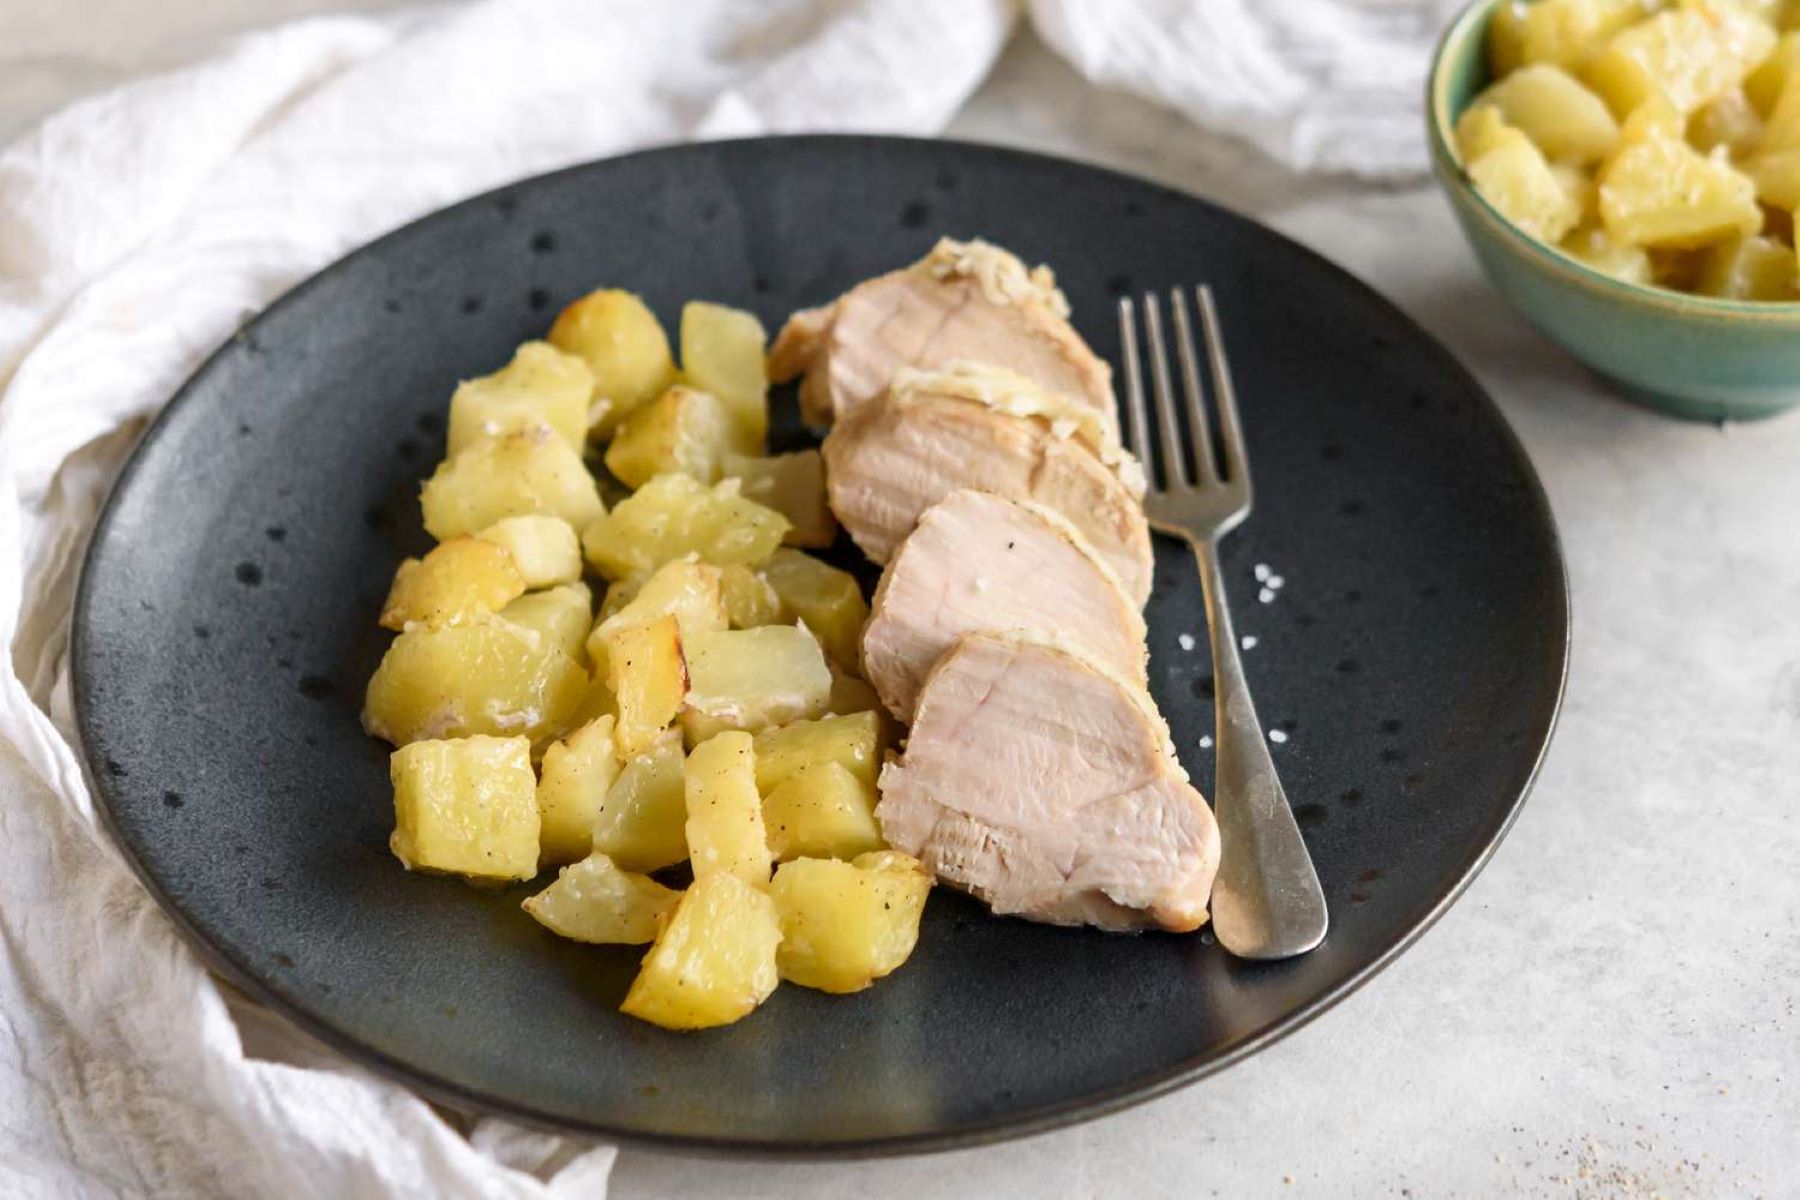 Surprising Food Combo: Chicken And Boiled Potatoes – You Won’t Believe The Results!